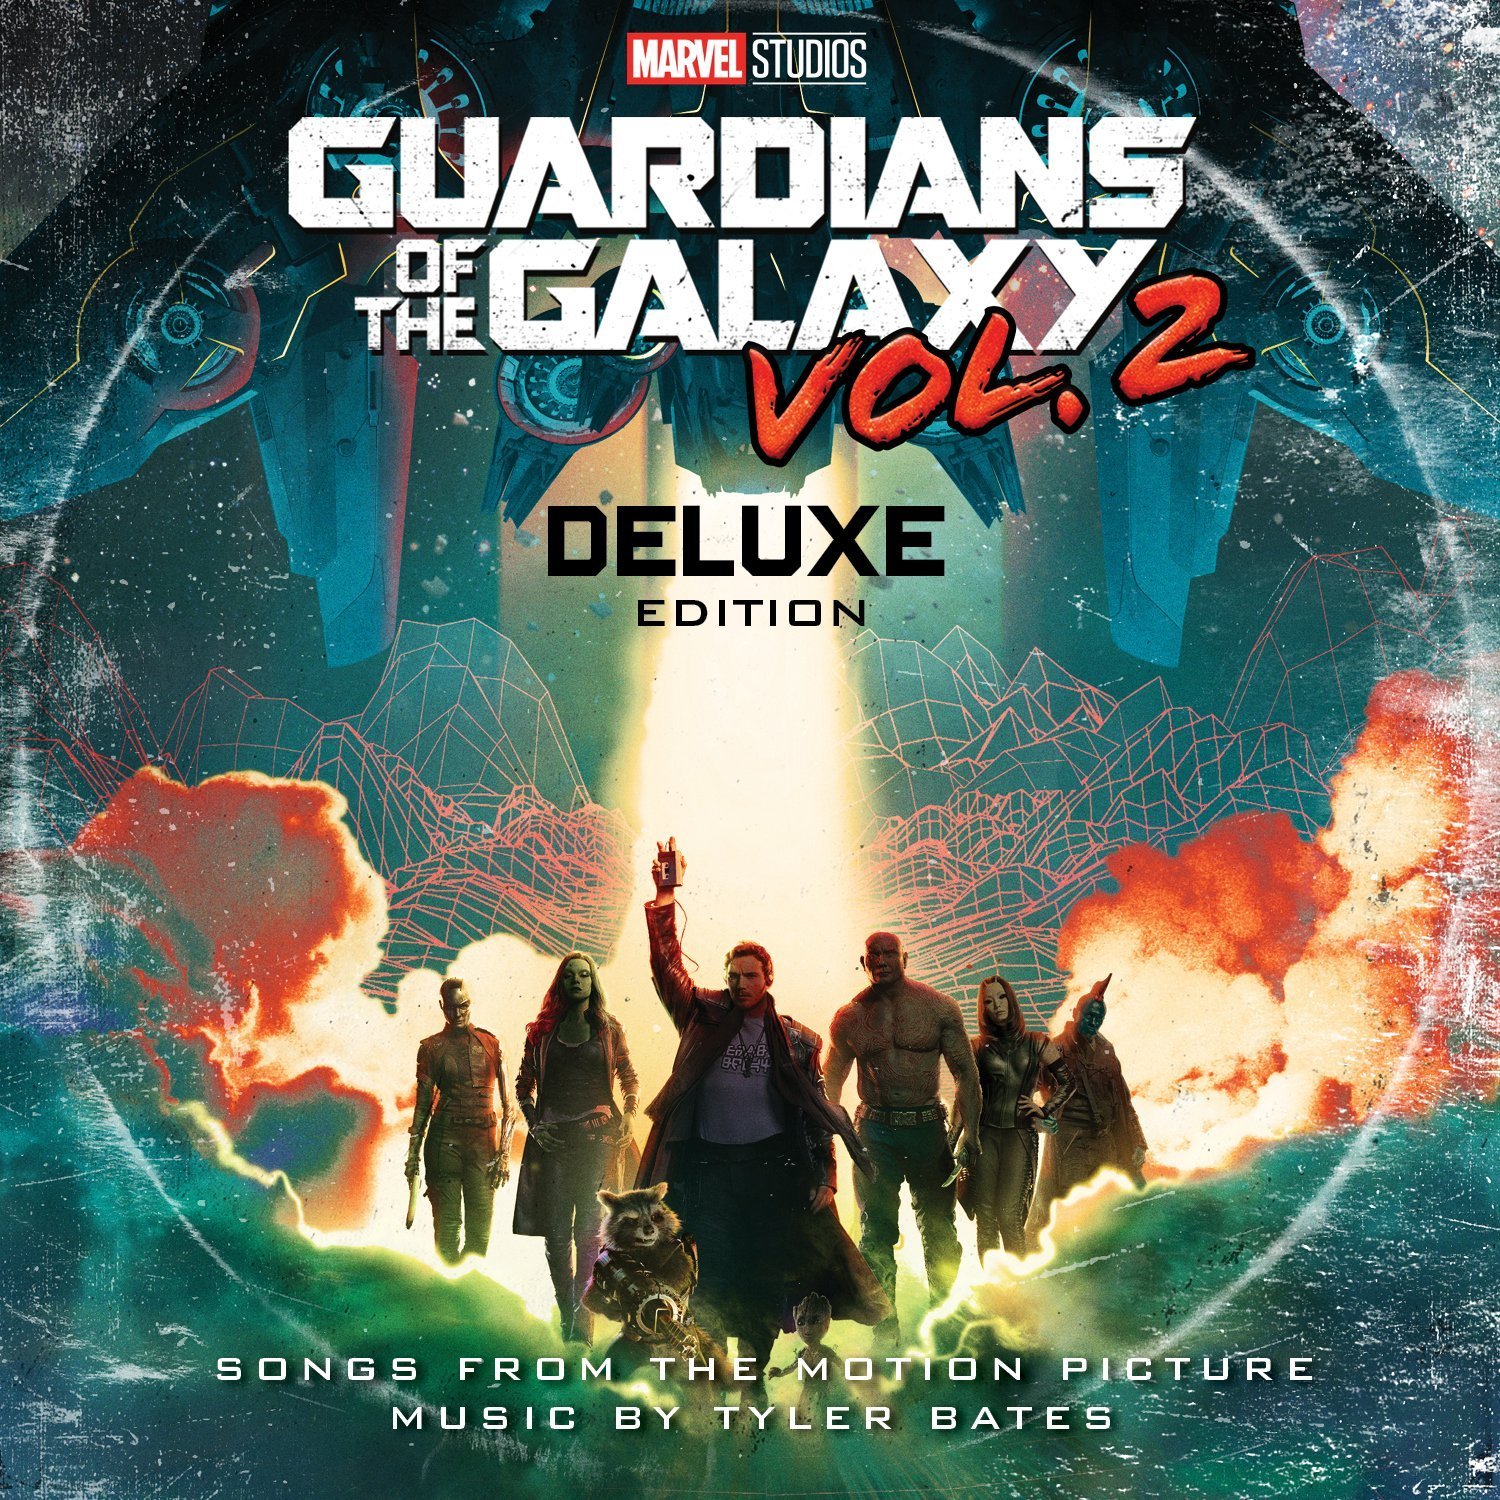 Guardians of the galaxy score soundtrack